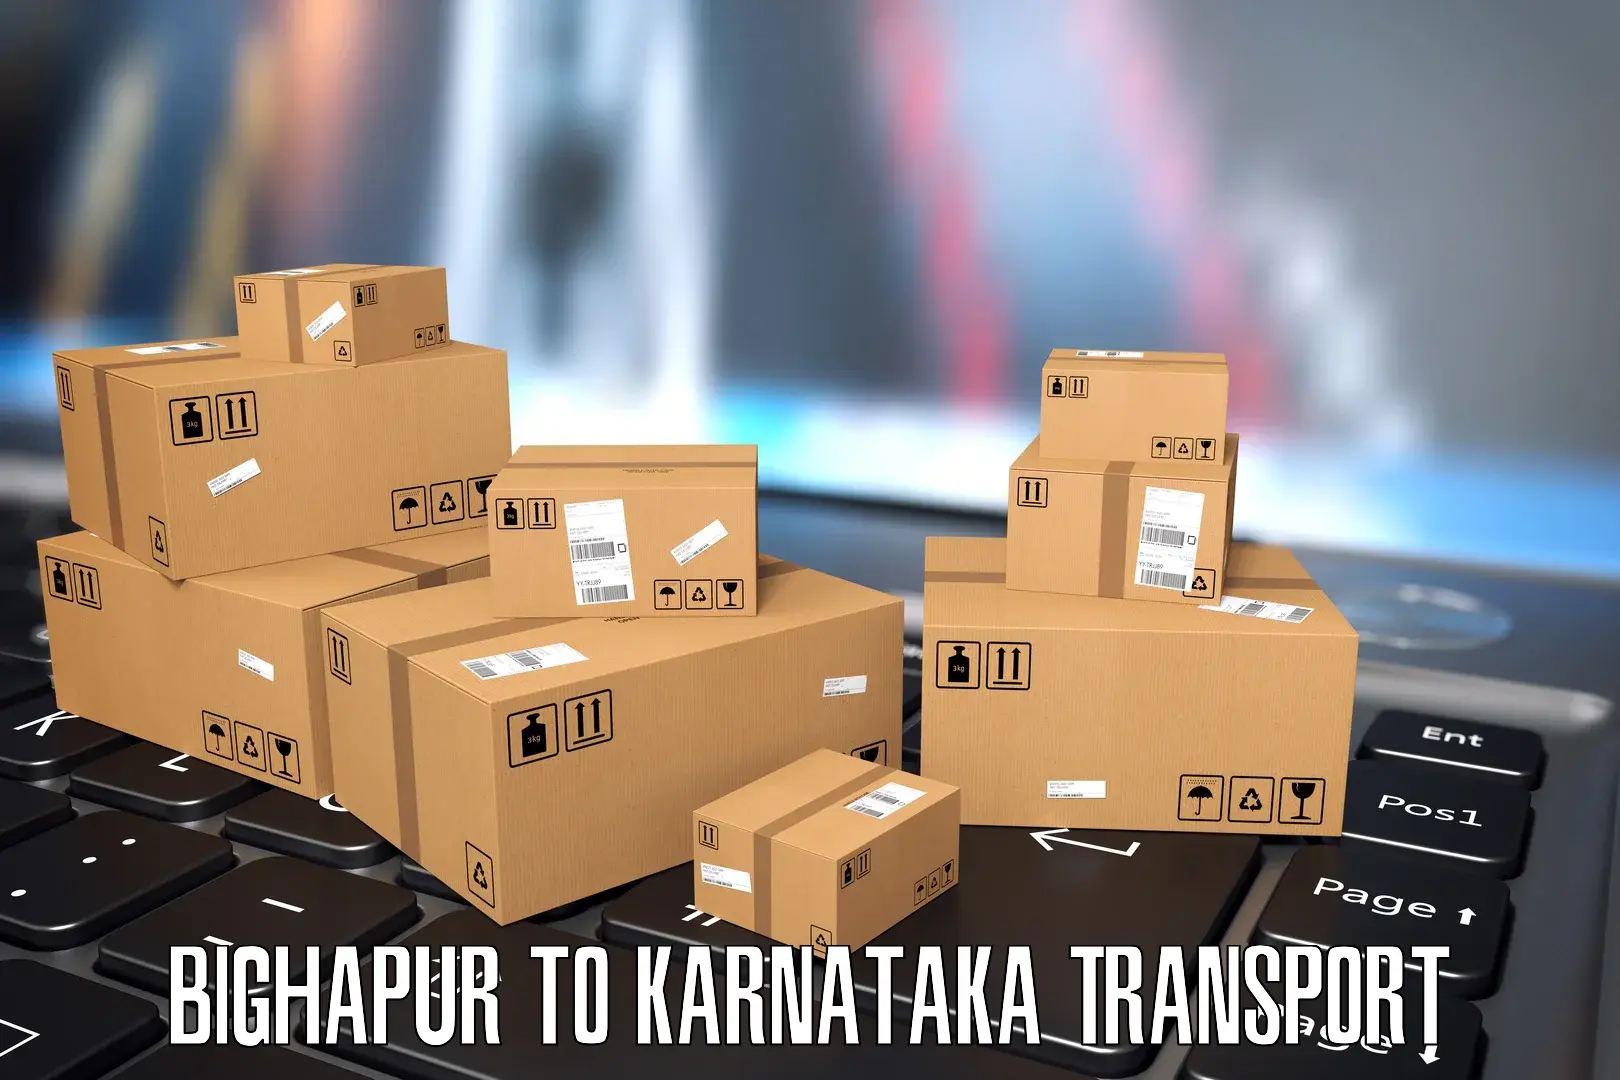 Goods delivery service Bighapur to Gulbarga